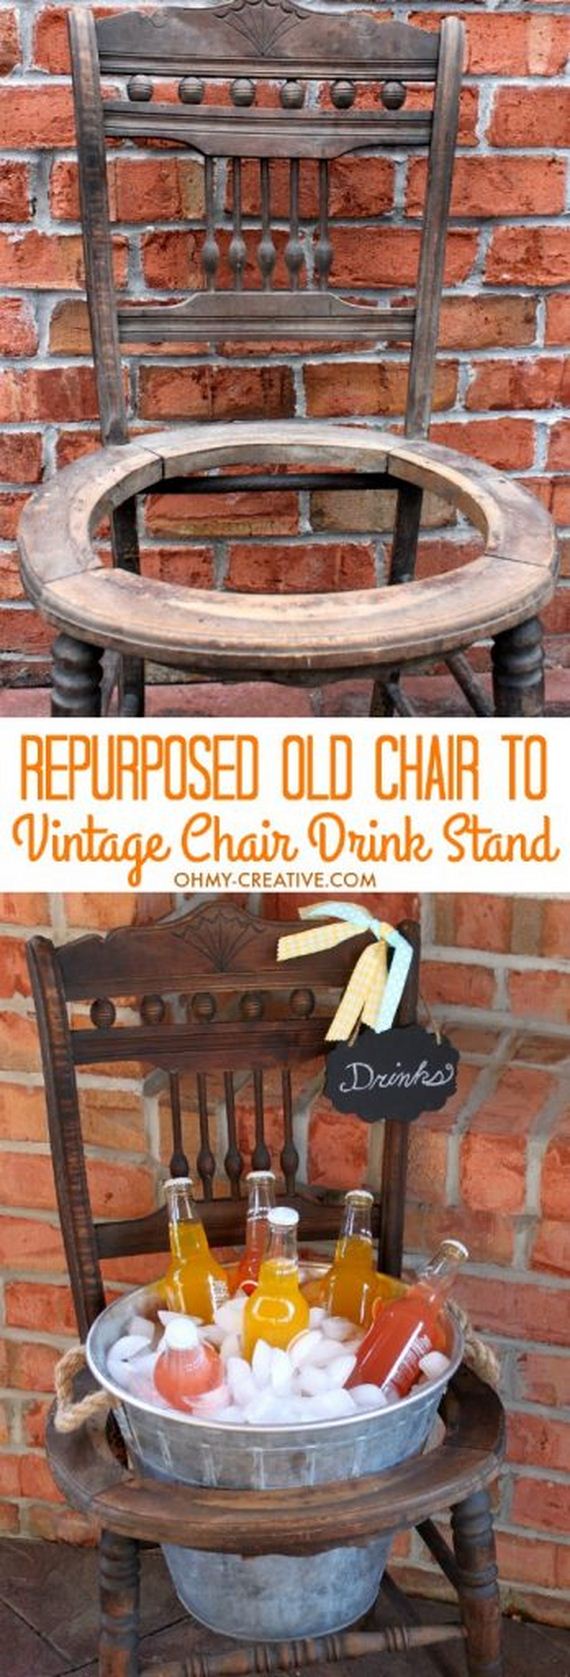 10-repurpose-old-chairs